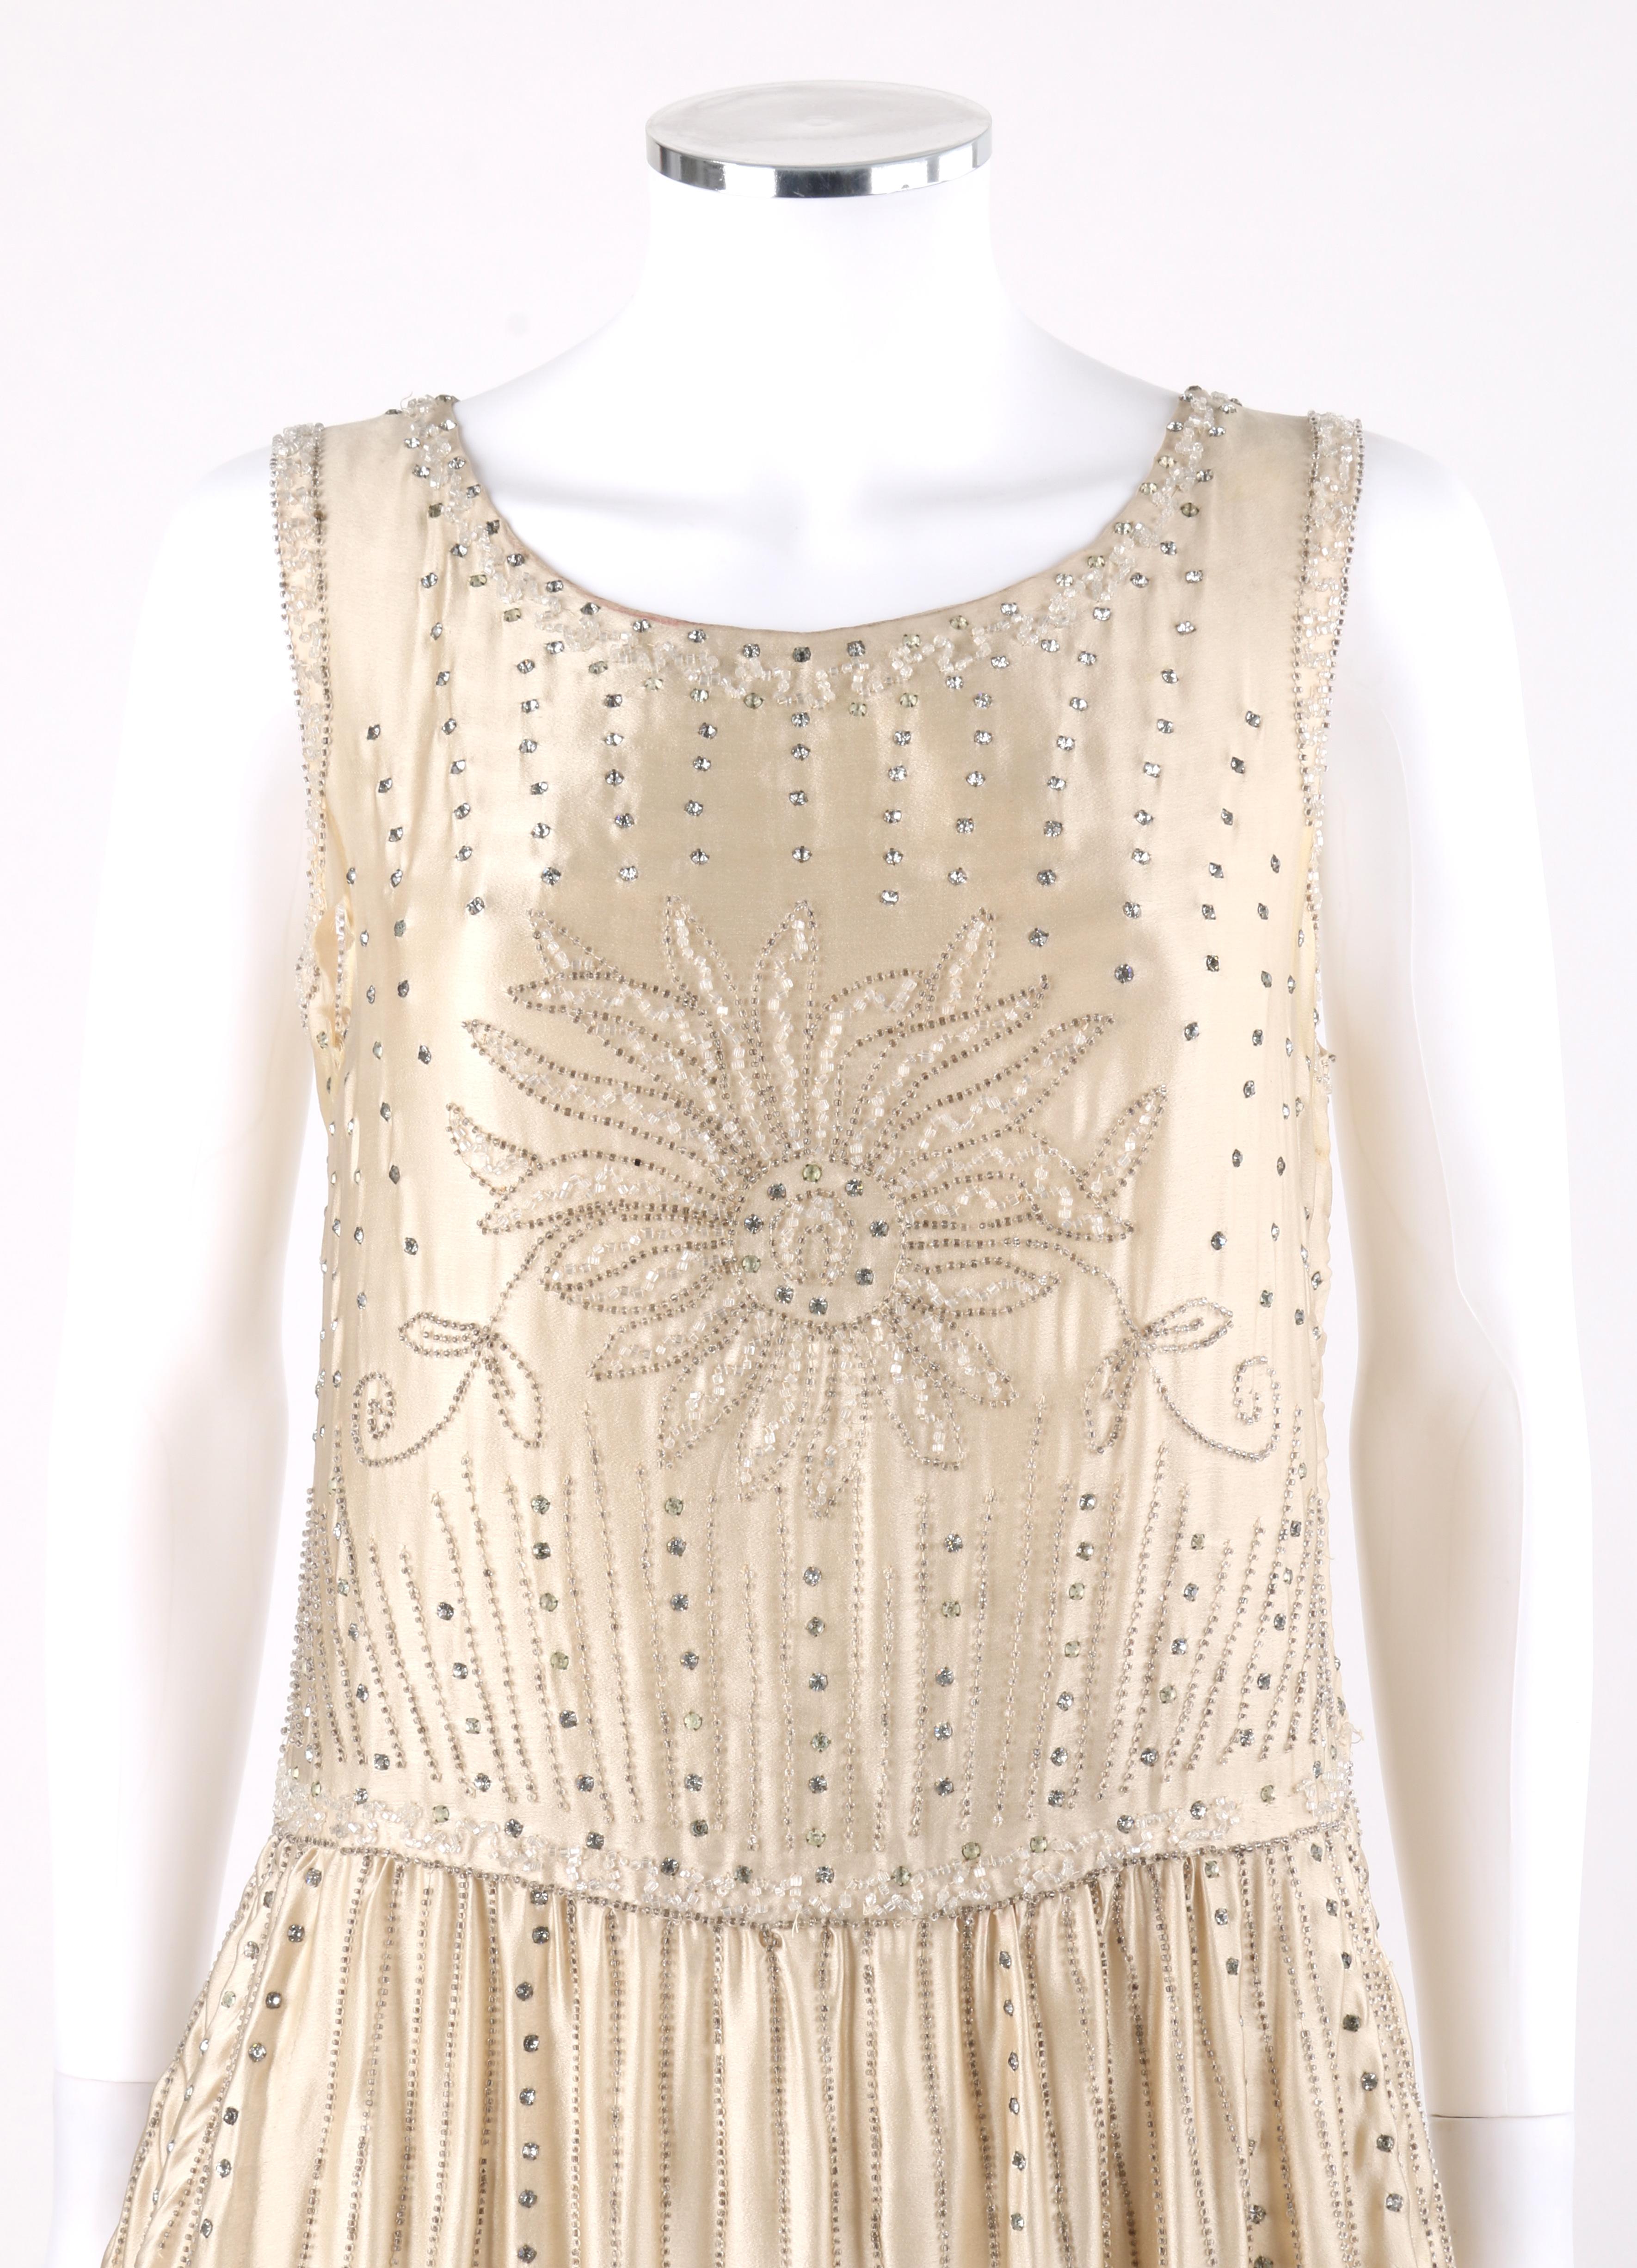 COUTURE c.1920’s One-of-a-kind Champagne Silk Floral Glass Beaded Rhinestone Flapper Dress 

Circa: 1920’s
Style: Flapper Dress
Color(s): Champagne 
Lined: No 
Unmarked Fabric Content: Silk  
Additional Details / Inclusions: Sleeveless tank top;